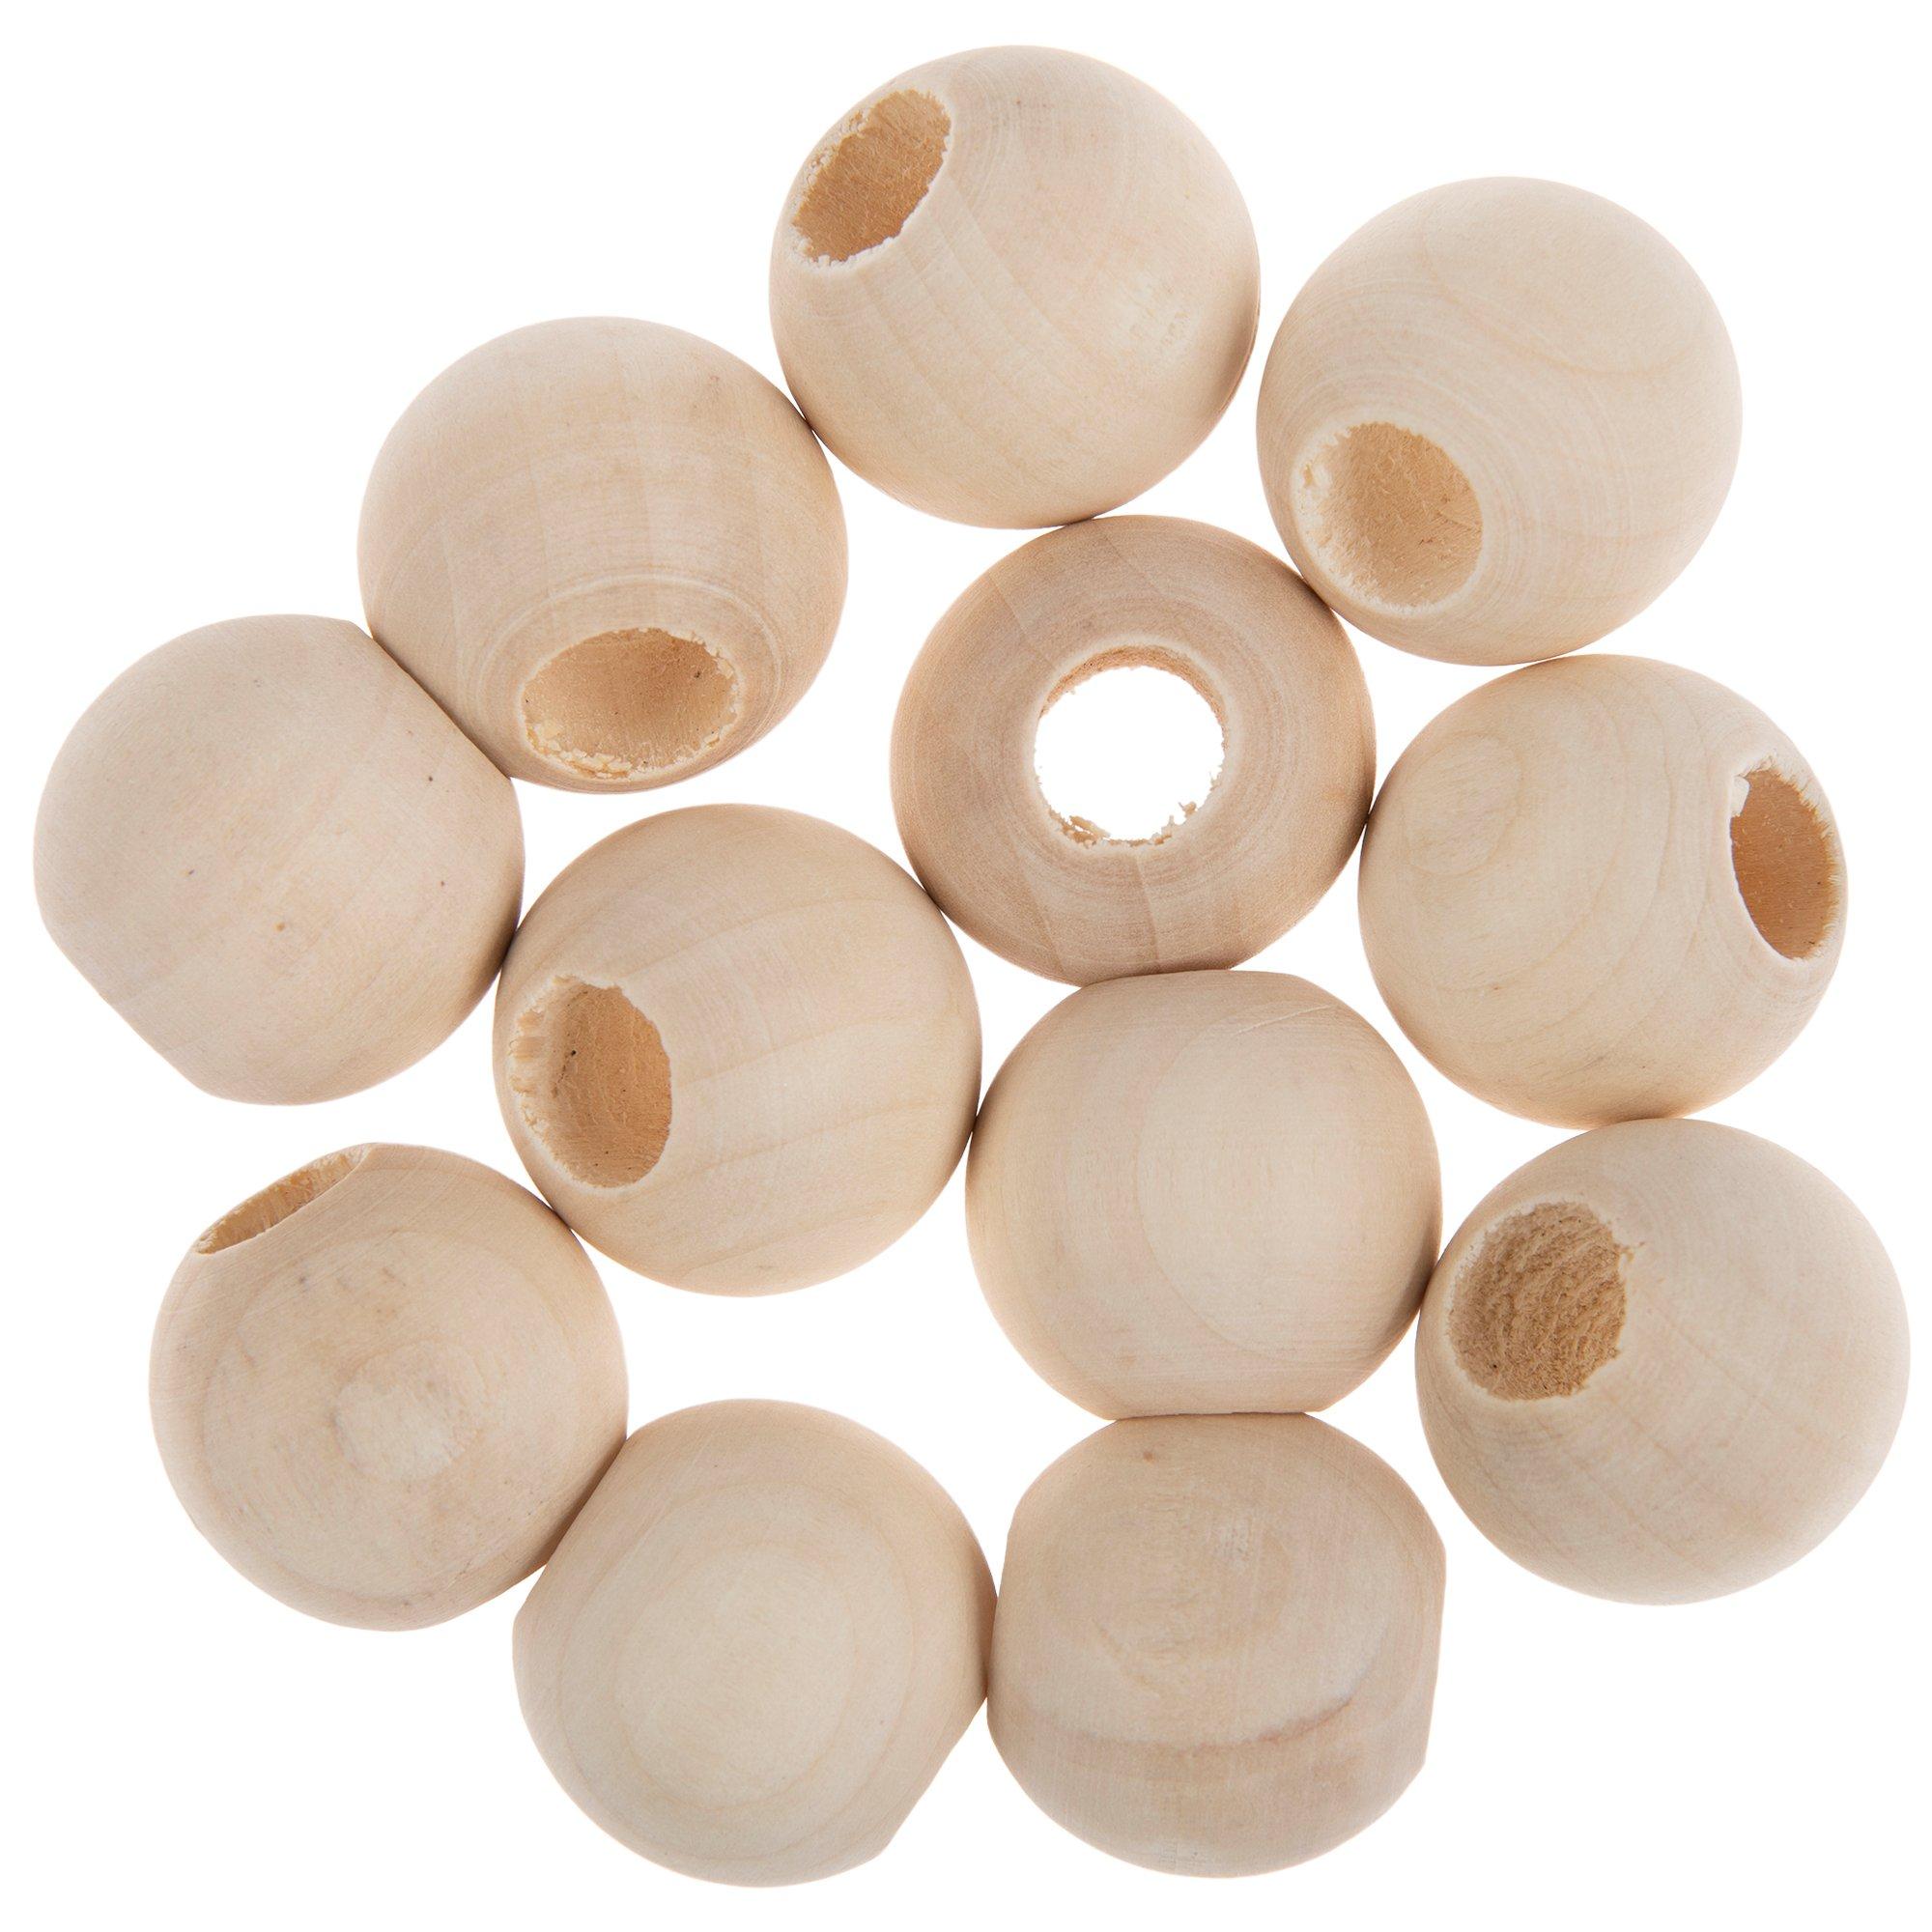 Wooden Beads for Jewelry Making, PASEO 10mm-25mm Painted Wood